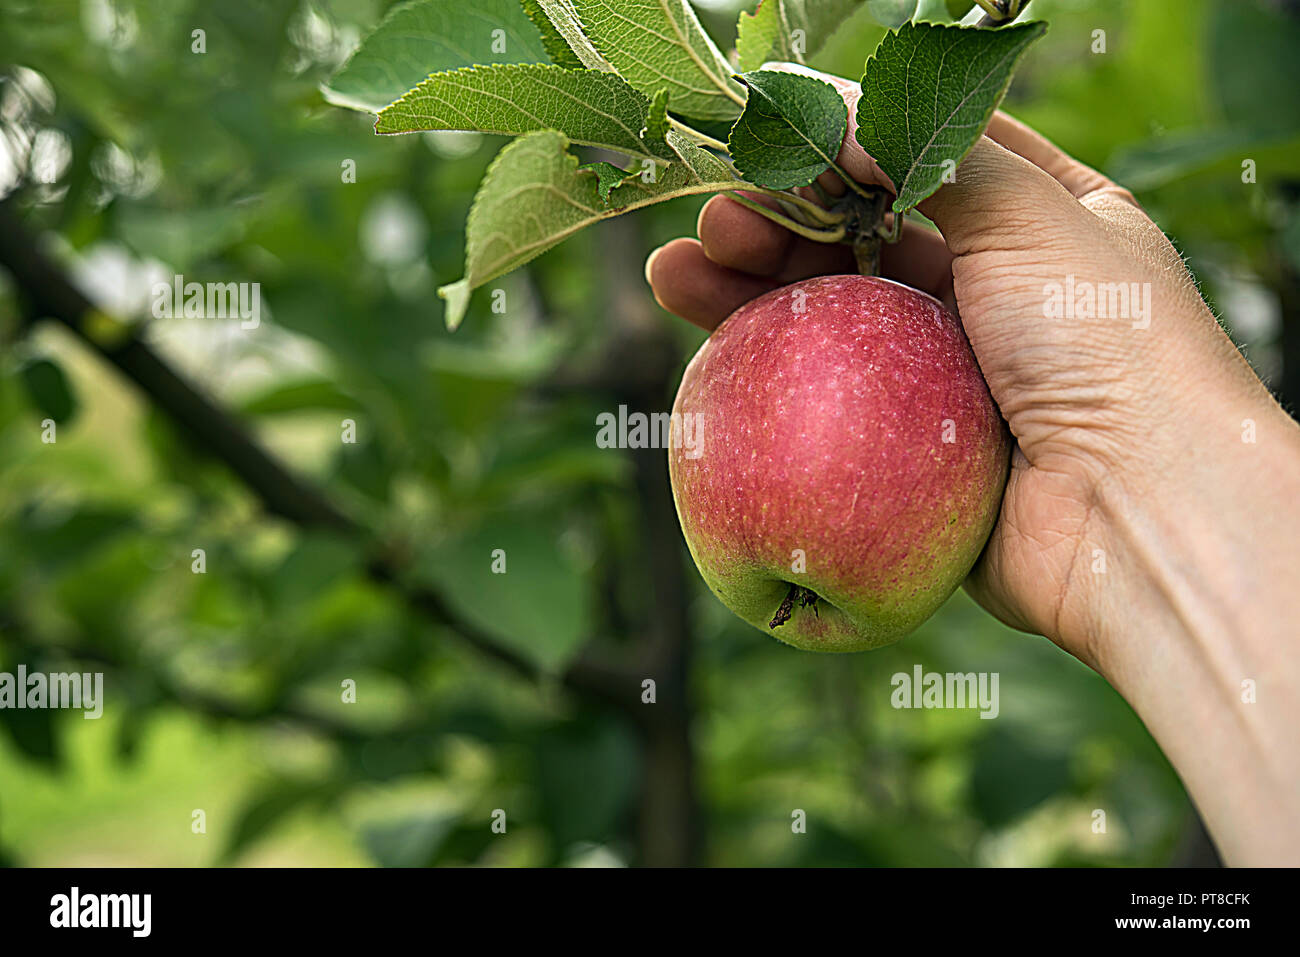 Fresh red side apple in farmer's hand, surrounded by green leaves and apple tree branches. Autumn or summer harvest time and healthy eating concepts.  Stock Photo